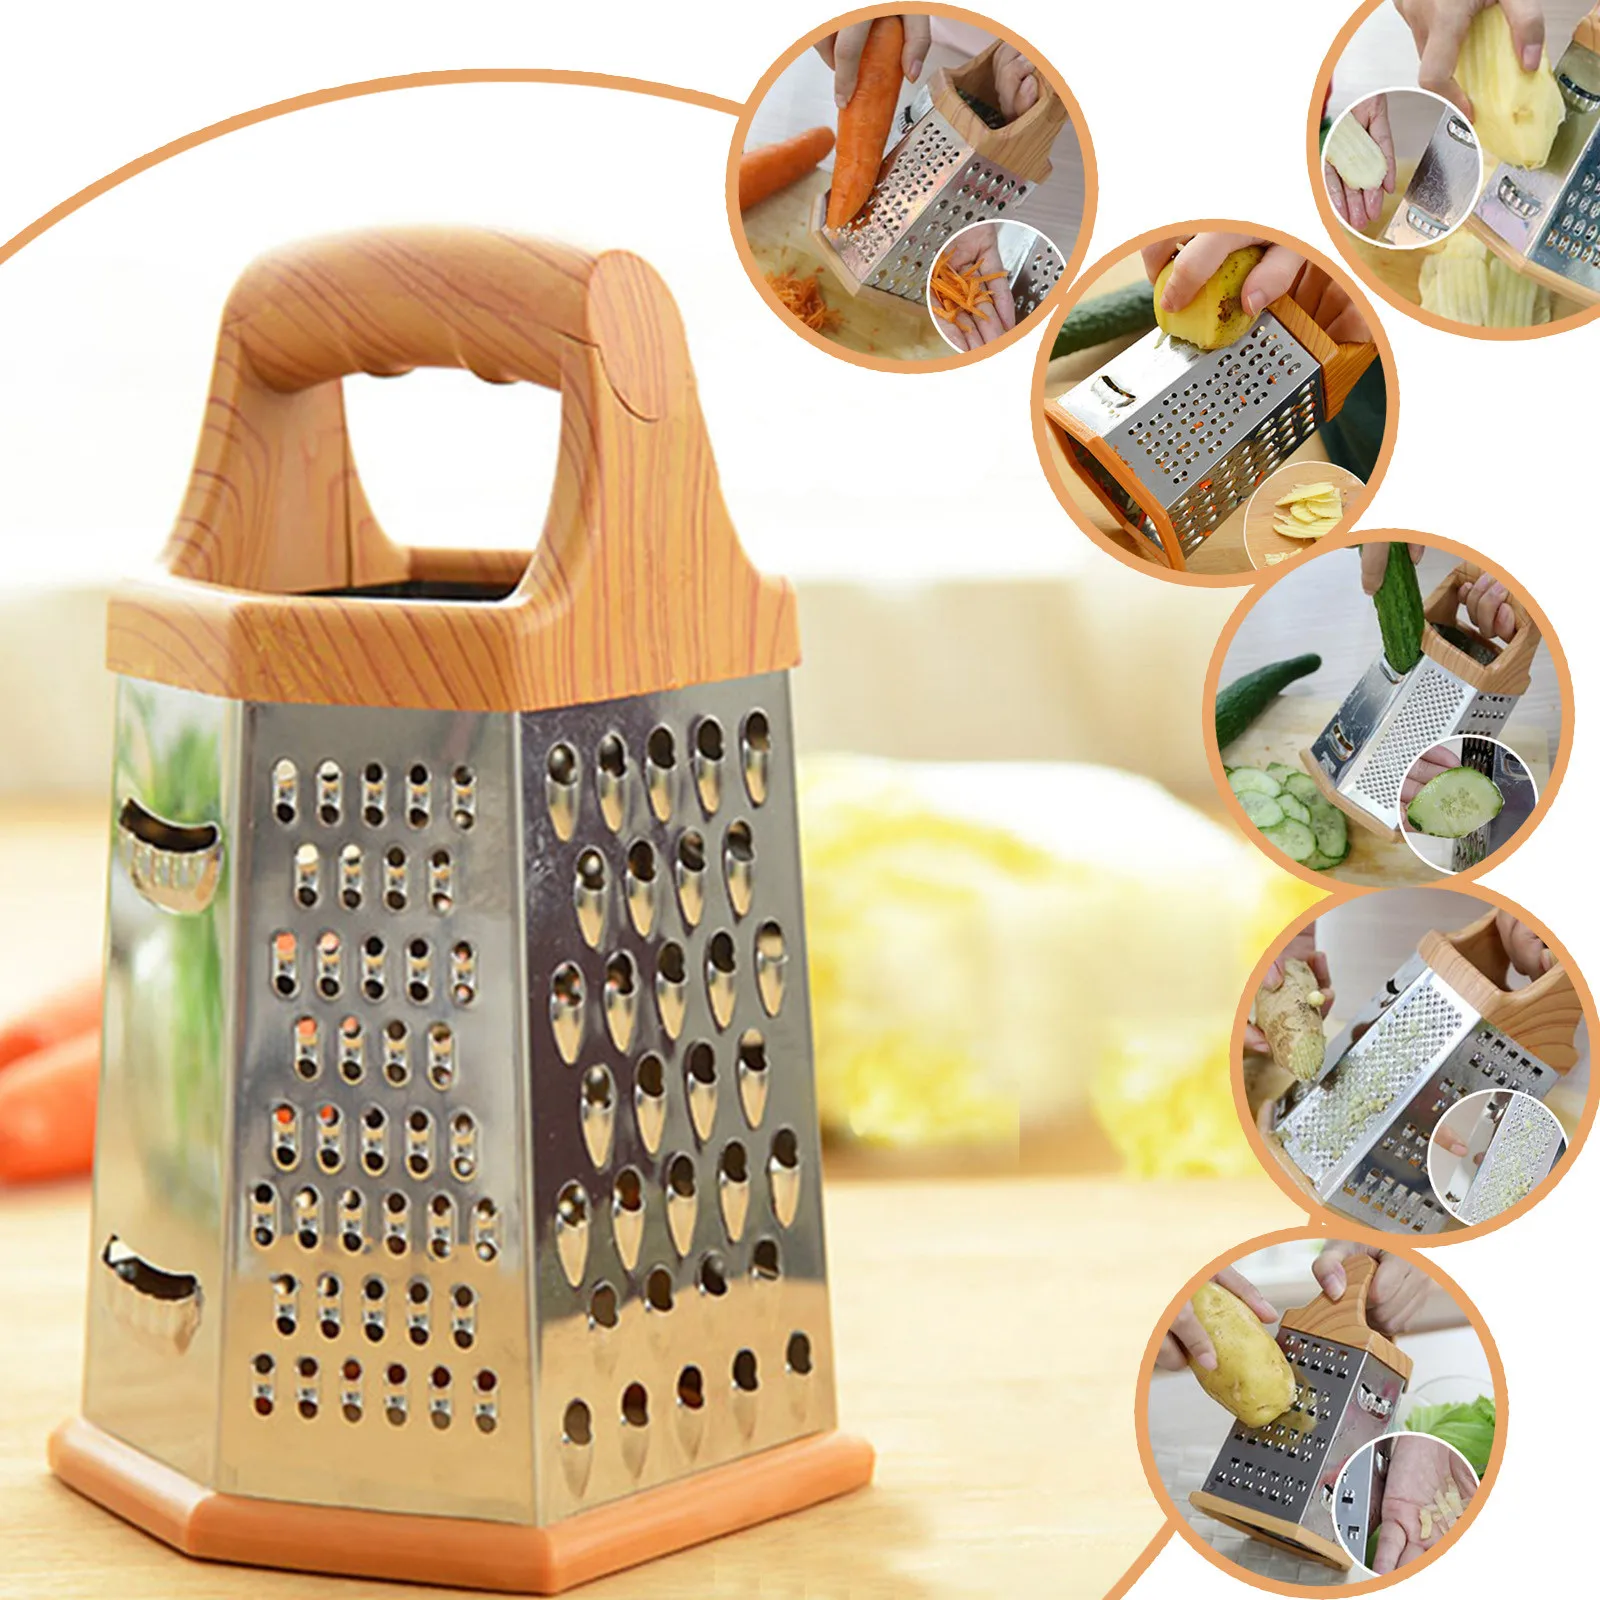 Cheese Grater & Shredder for Kitchen Stainless Steel 6-Sides Perfect to Slice Fruits Vegetables Cheeses 